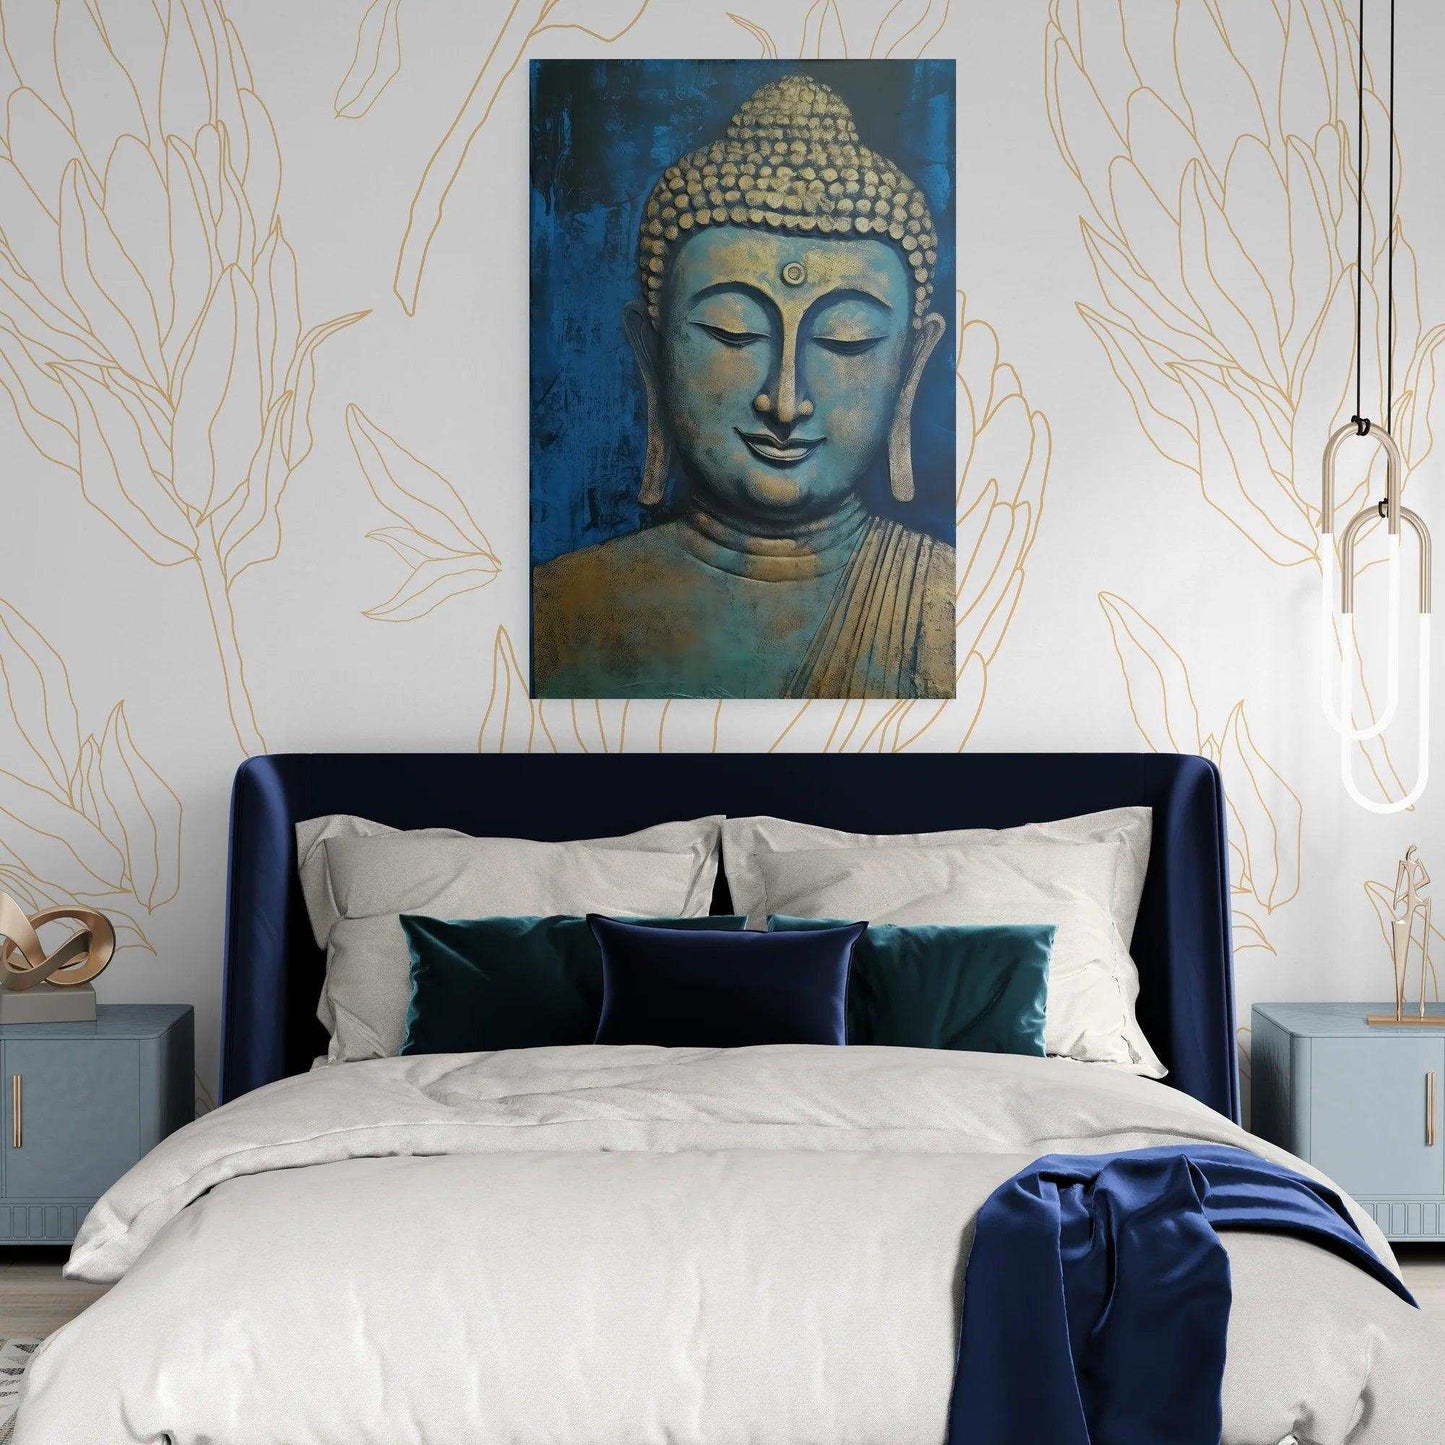 The blue and gold Buddha painting is the focal point above a plush bed with navy and emerald accents, framed by walls adorned with elegant gold leaf patterns, adding a touch of sophistication and tranquility to the bedroom decor.